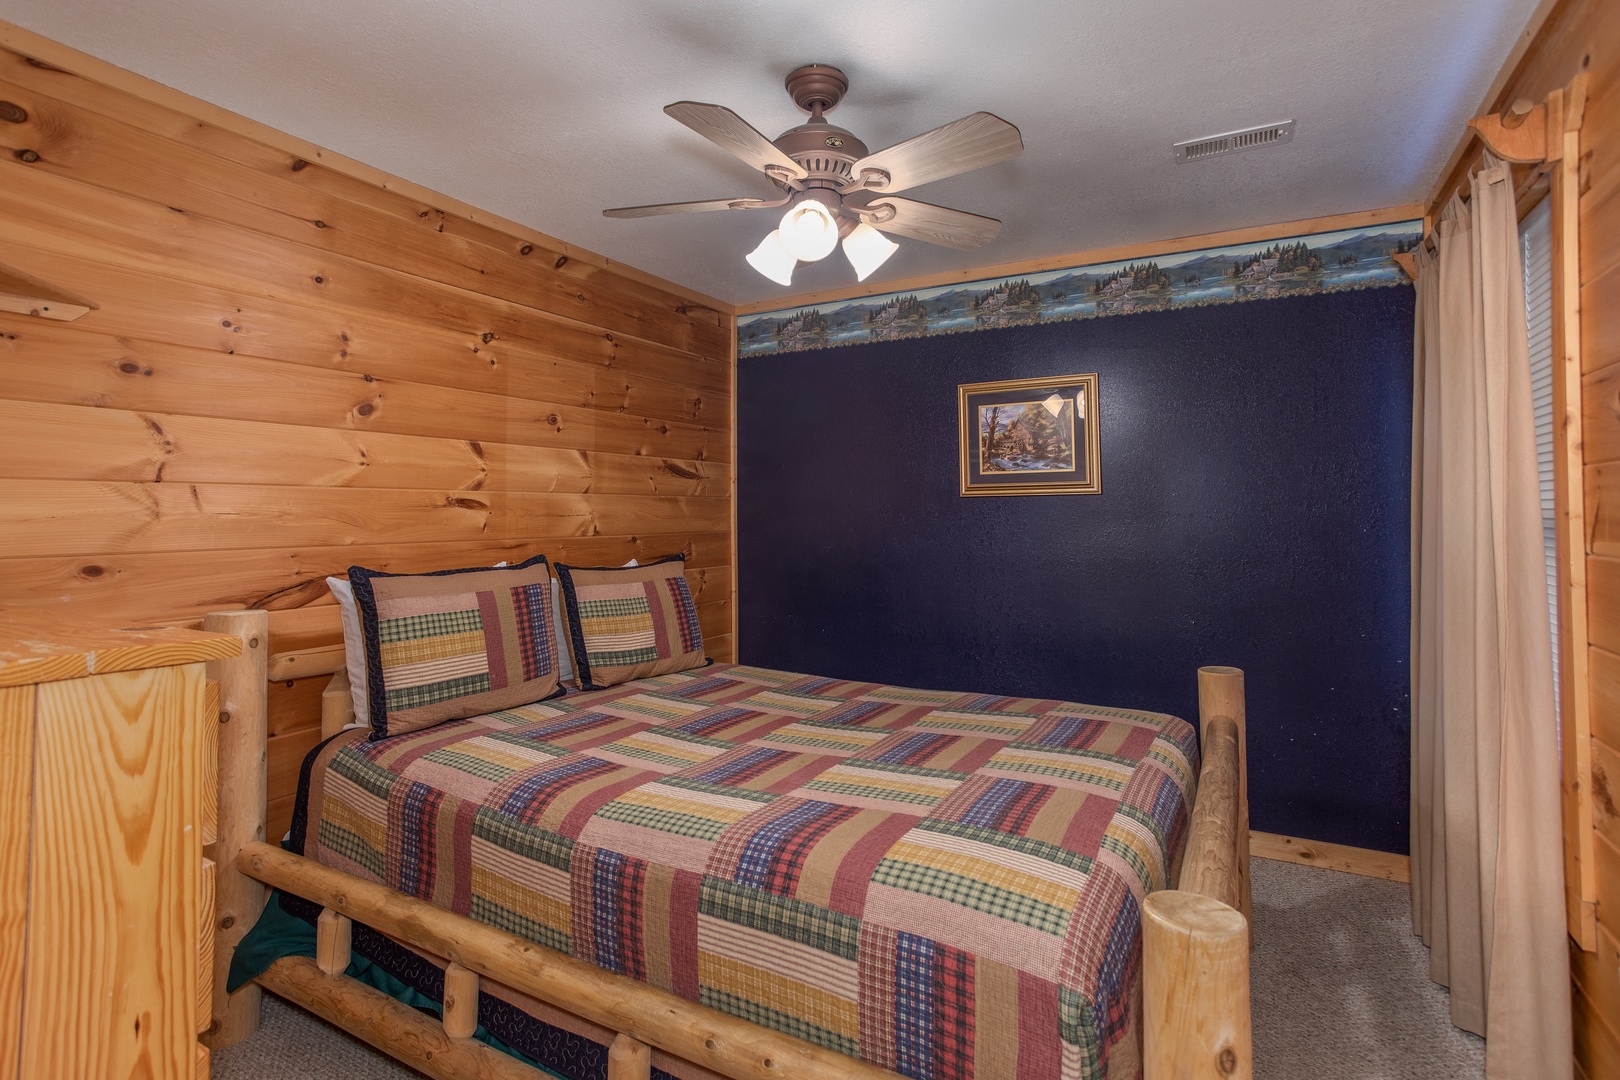 Queen-sized bed in a bedroom at Bearly in the Mountains, a 5-bedroom cabin rental located in Pigeon Forge